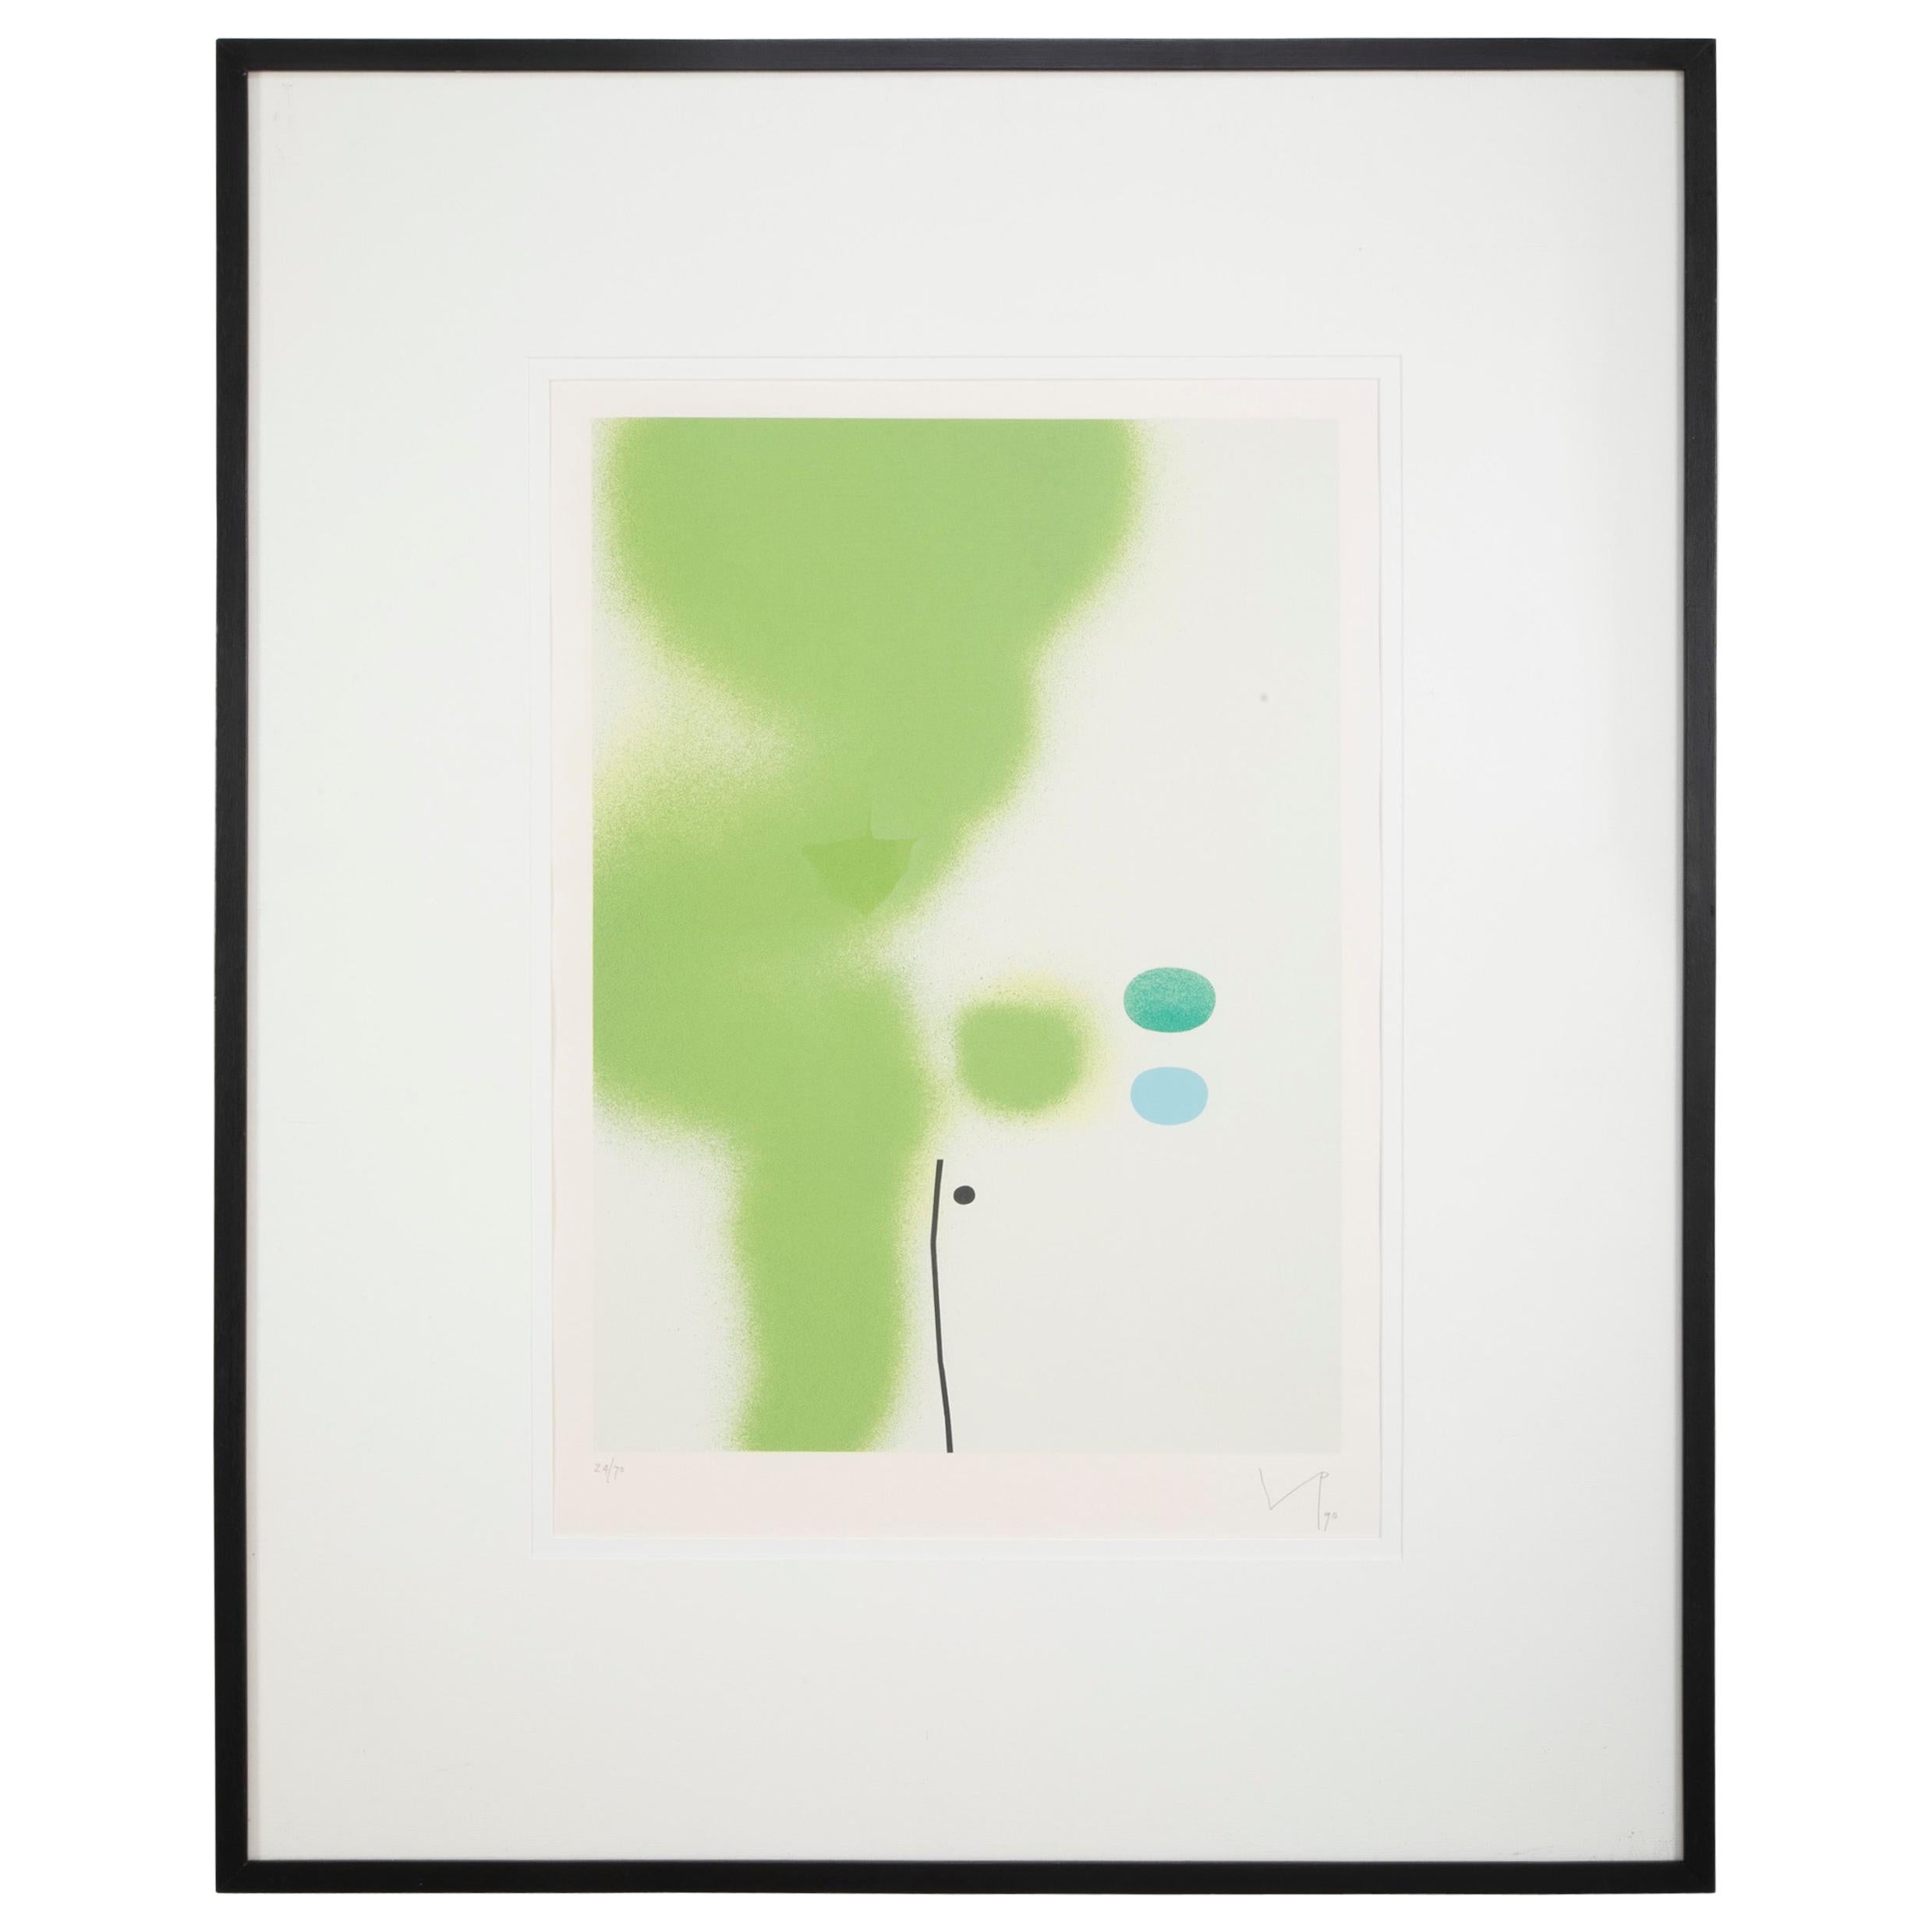 Victor Pasmore Screenprint "Untitled 06" For Sale